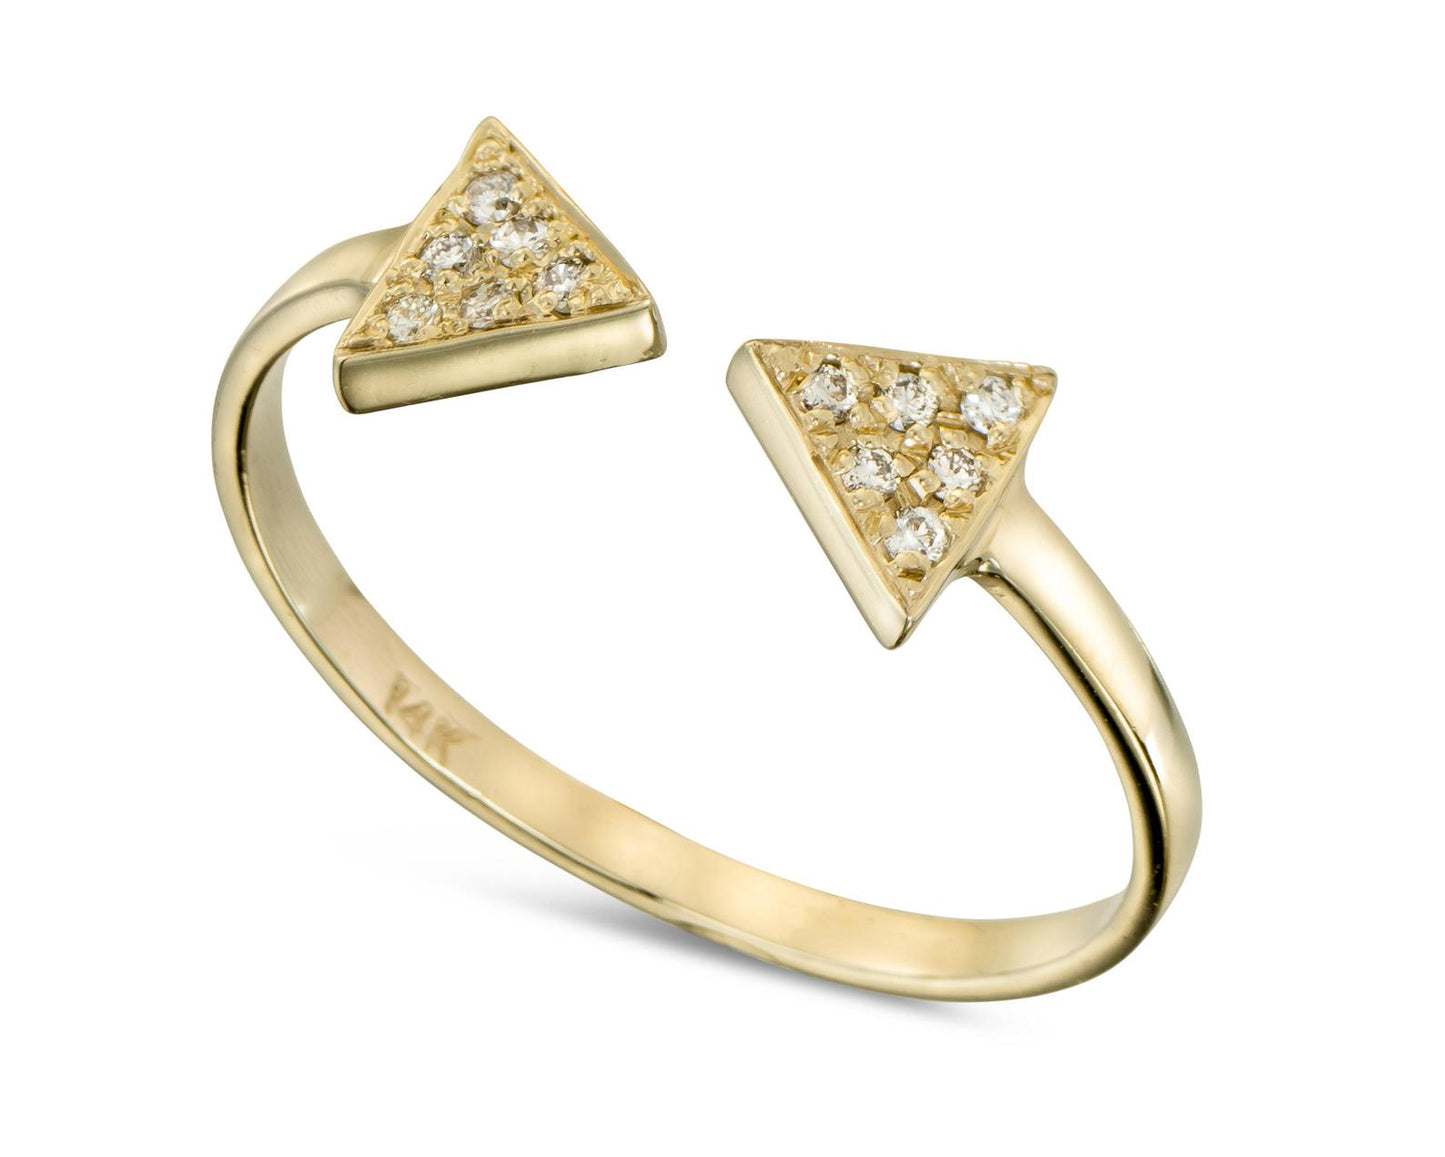 Two Triangle Ring